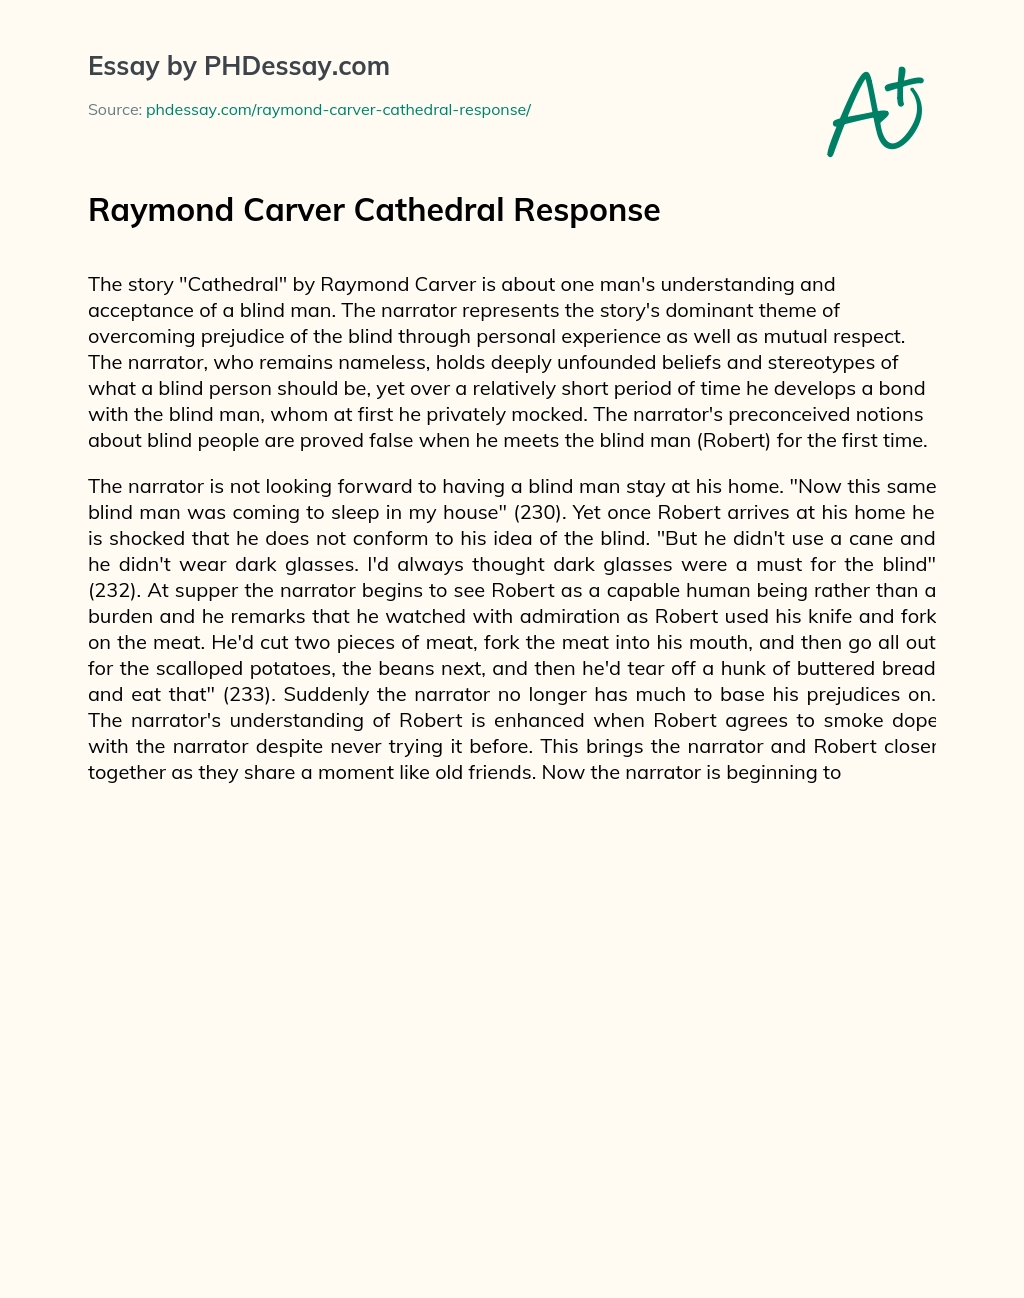 cathedral by raymond carver essay papers